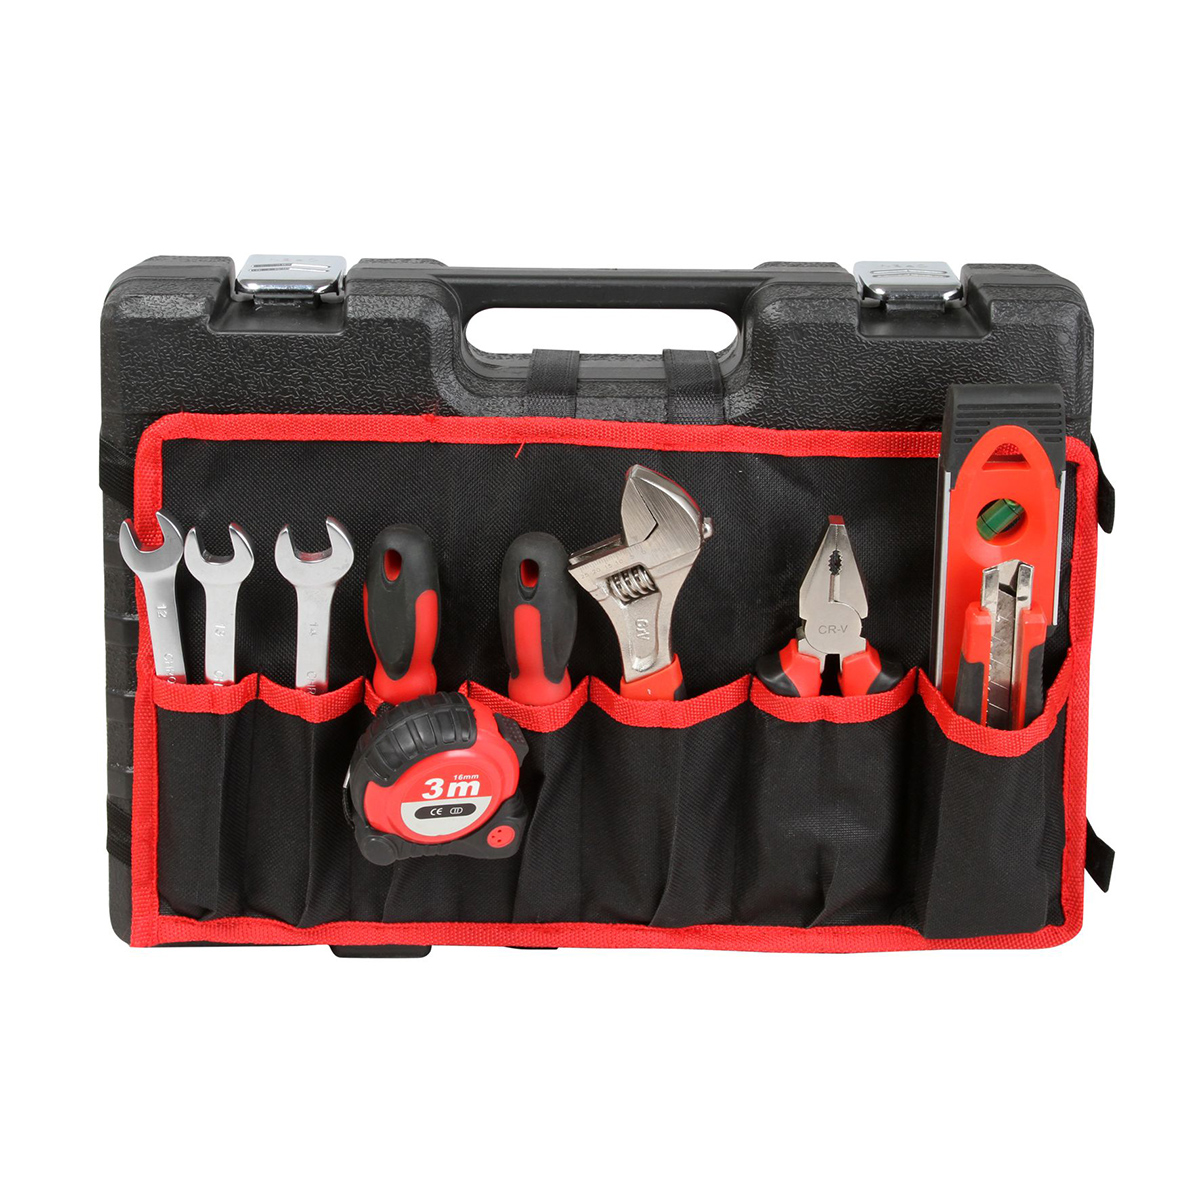 122PC TOOL SET IN BLOW CASE